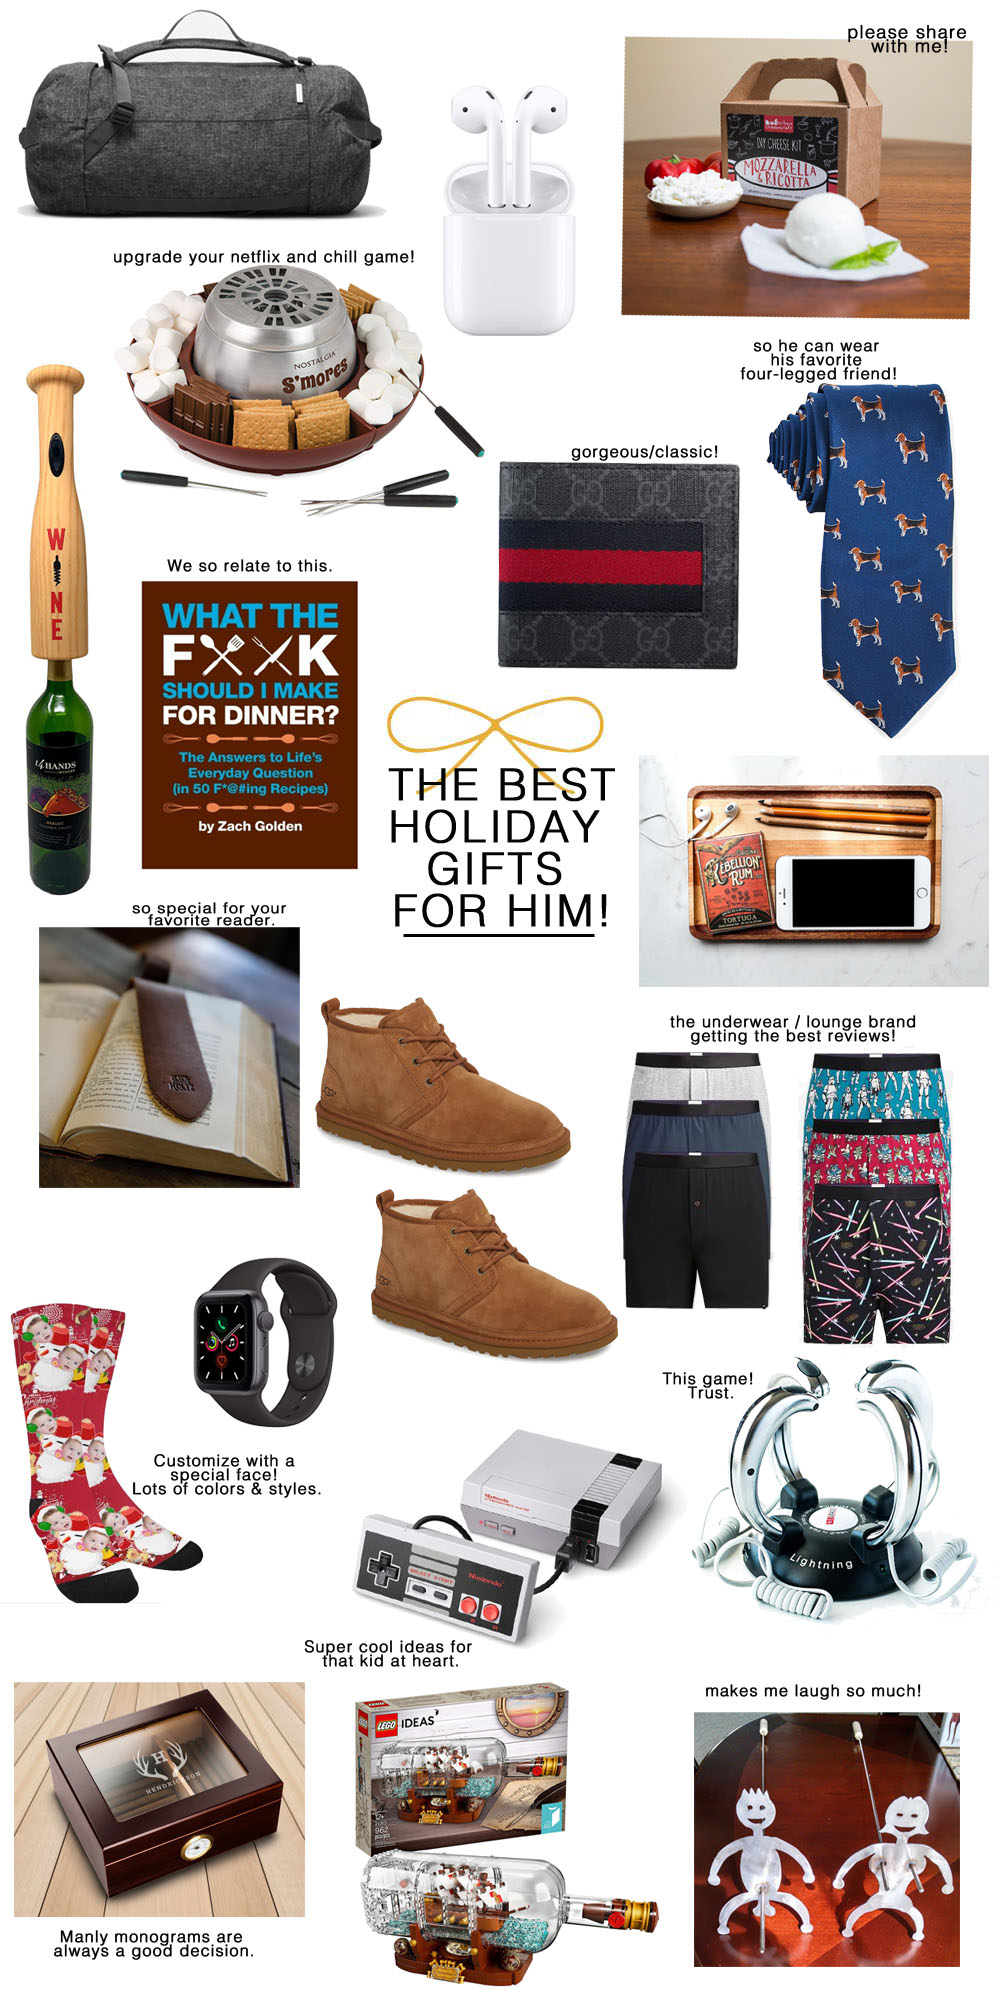 20+ Creative, Fun & Classic Gifts for Him by popular Florida life and style blog, The Modern Savvy: collage image of Everlane travel bag, baseball bat wine opener, Gucci wallet, cookbook, dog tie, monogrammed leather bookmark, ugg chukka boots, wooden catchall, custom photo socks, apple watch, classic nintendo, lightning reaction reload, engraved humidor, Lego ship in a bottle building set, and adult BBQ/S'mores skewers.